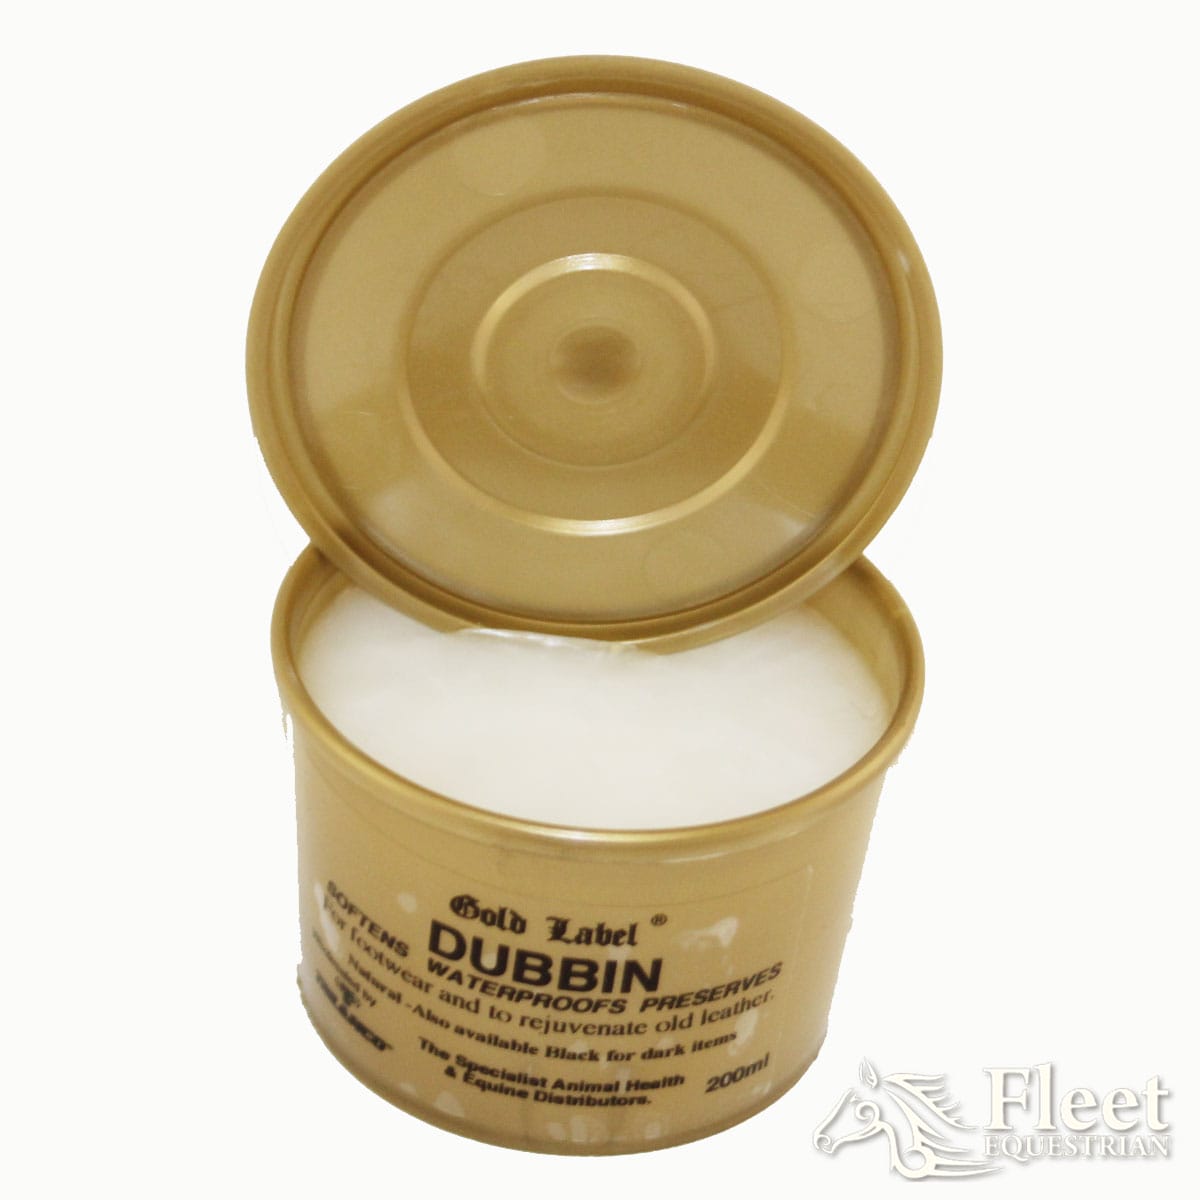 GOLD LABEL DUBBIN 500G NATURAL WATERPROOFS AND SOFTENS LEATHER 